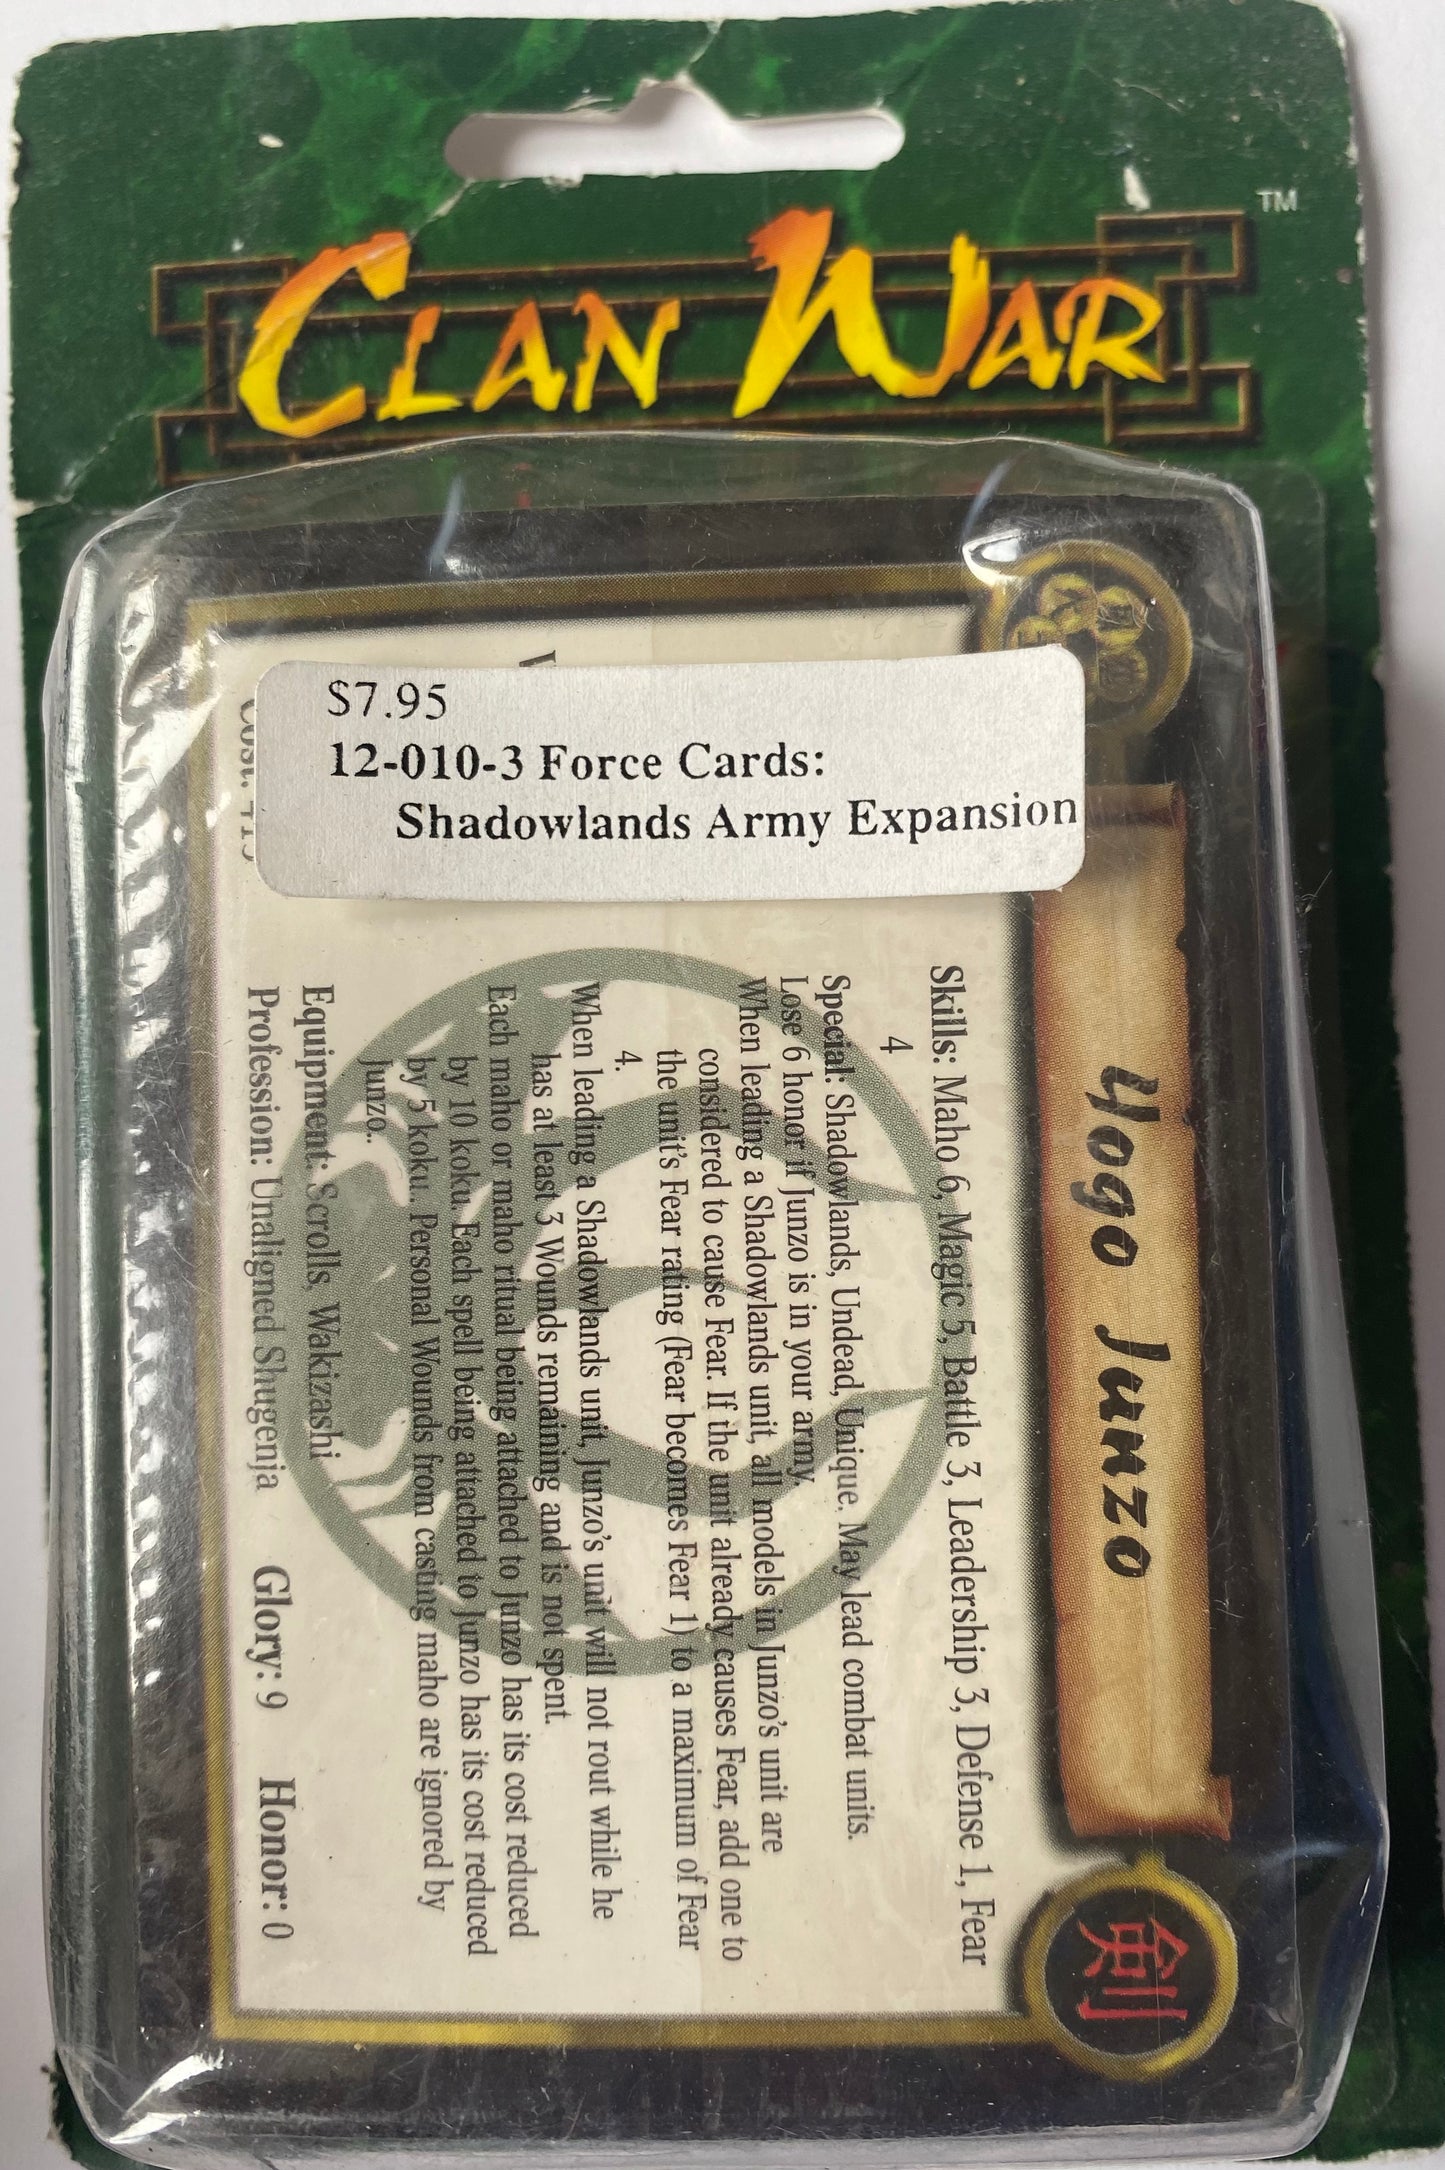 12-010-3 Force Cards: Shadowlands Army Expansion